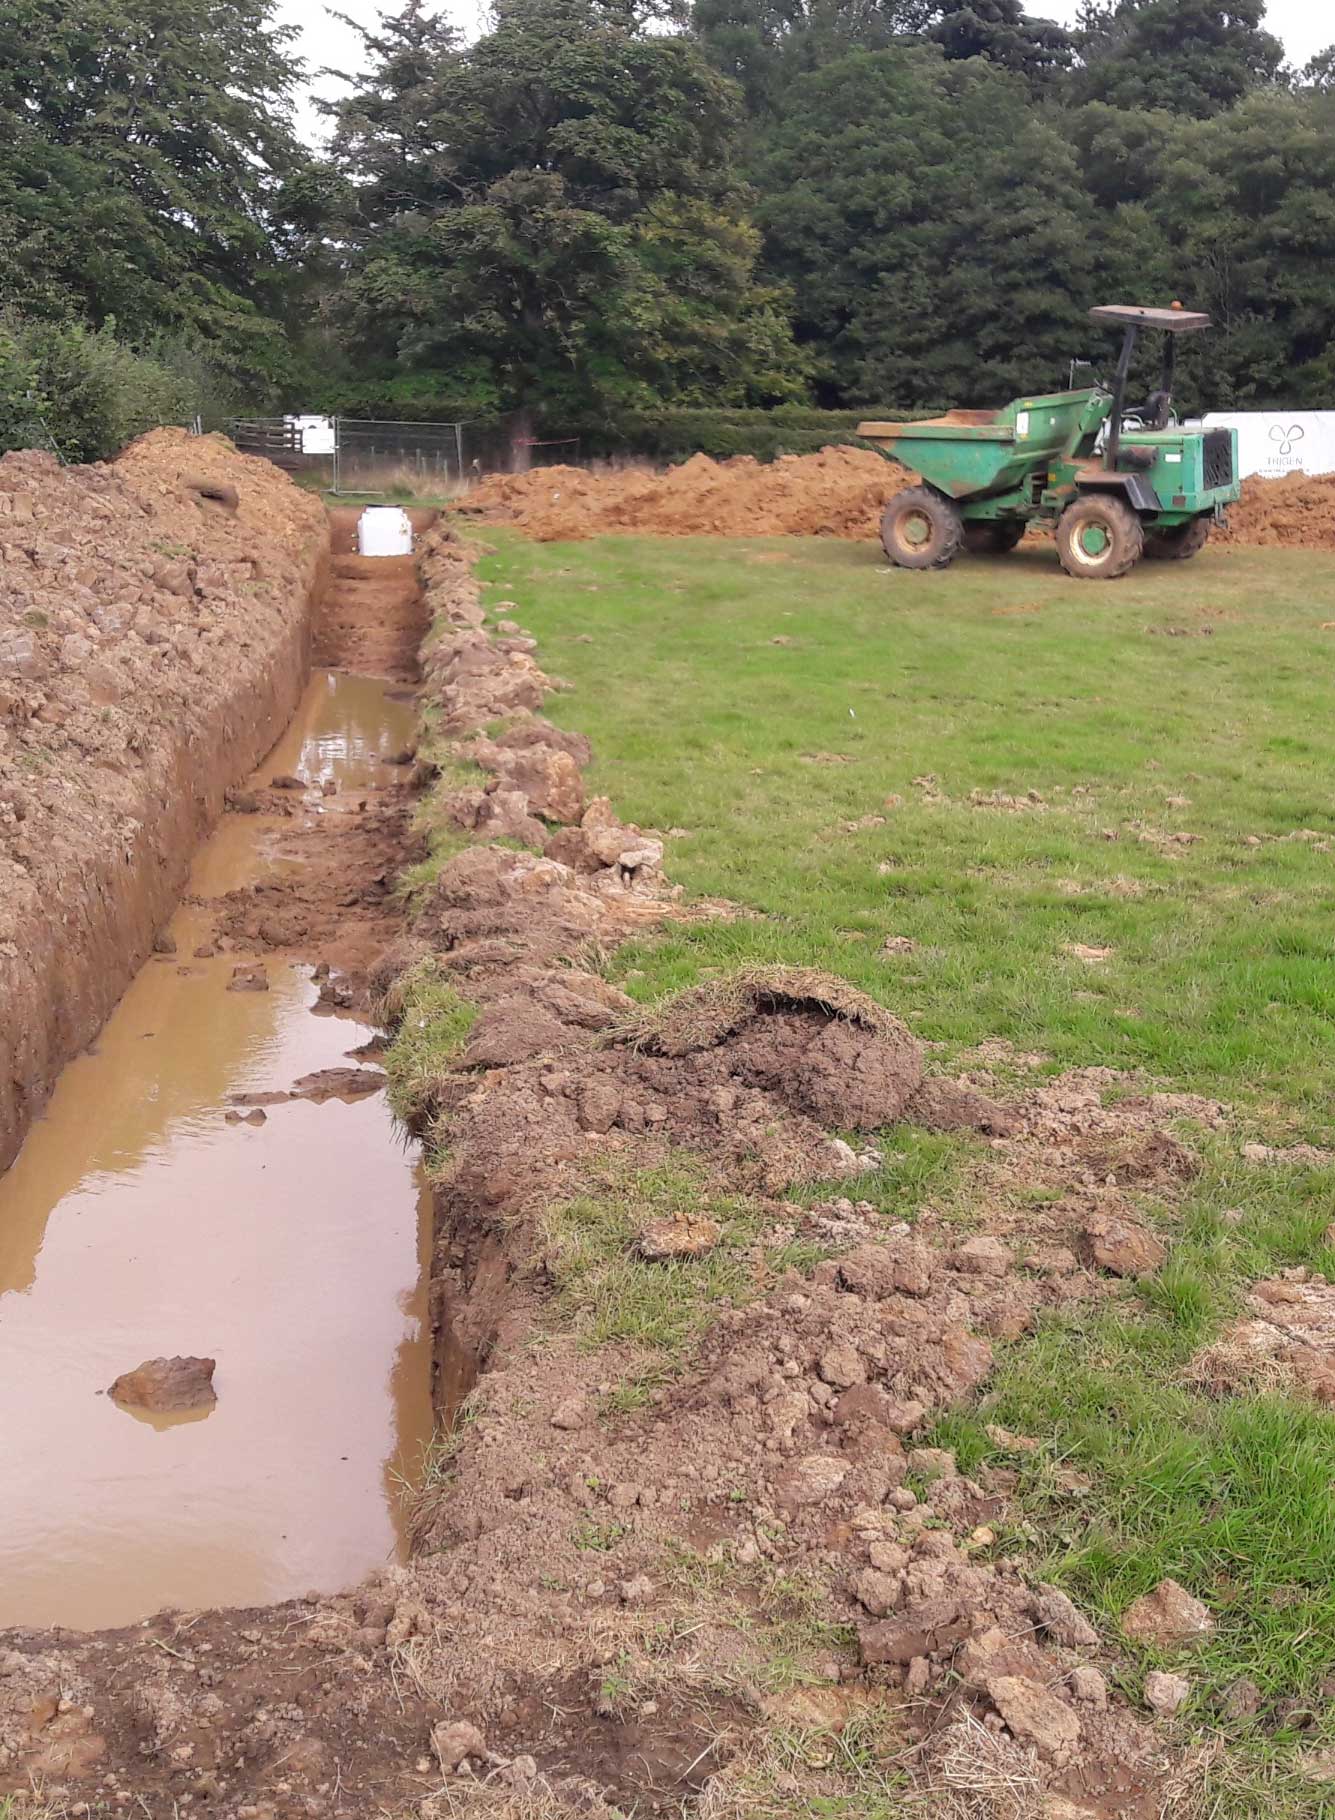 New excavated trenches in a field for ground sourced heat pumps.